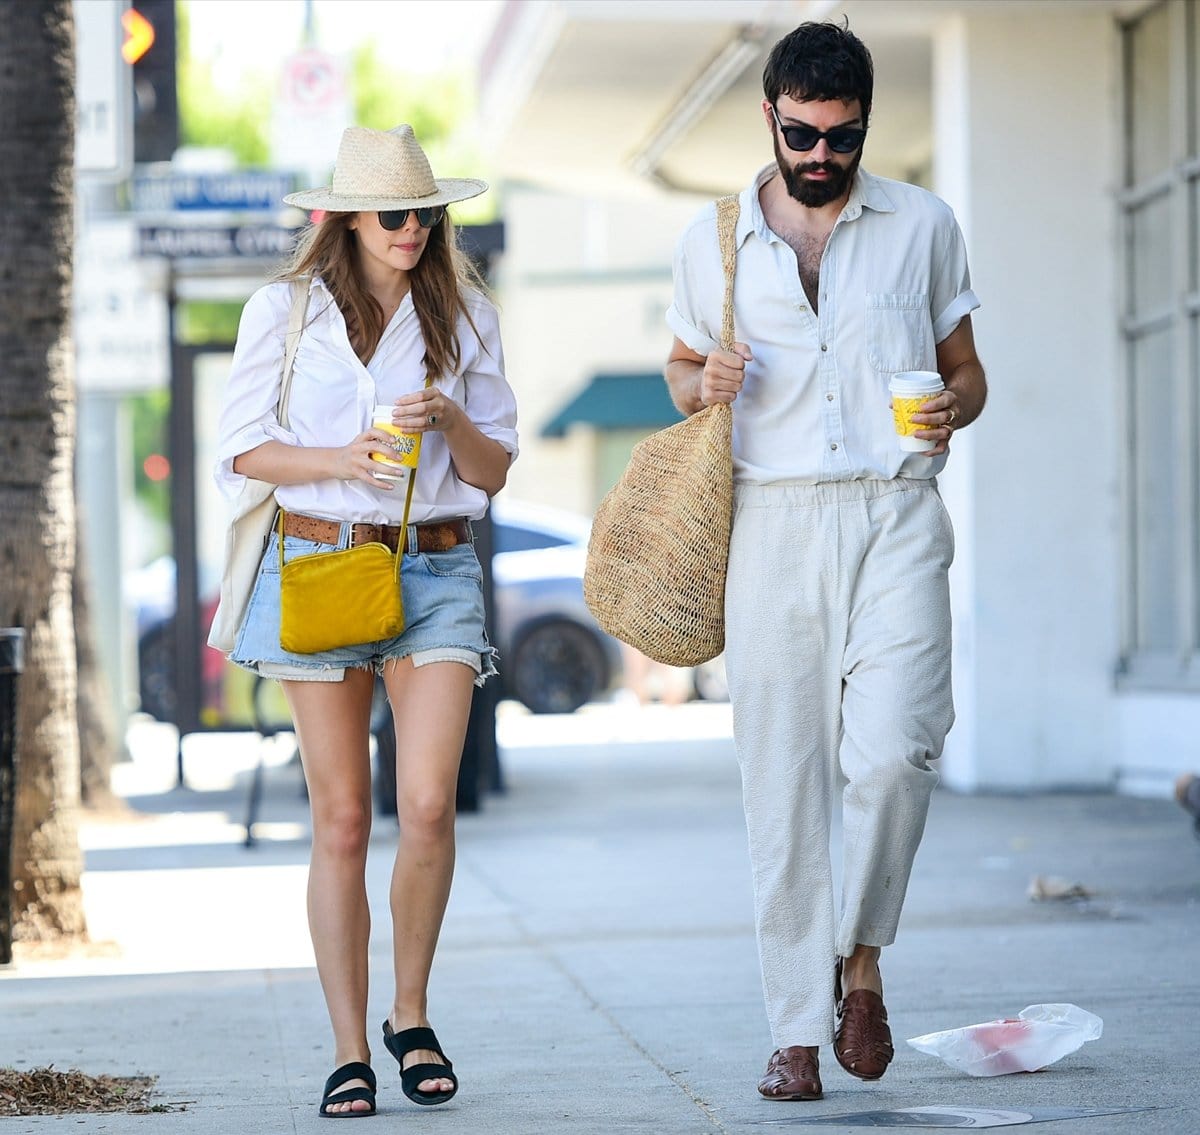 For her date with Robbie Arnet, Elizabeth Olsen wore Birkenstock sandals with a white button-down shirt, Daisy Dukes, and Garrett Leight sunglasses